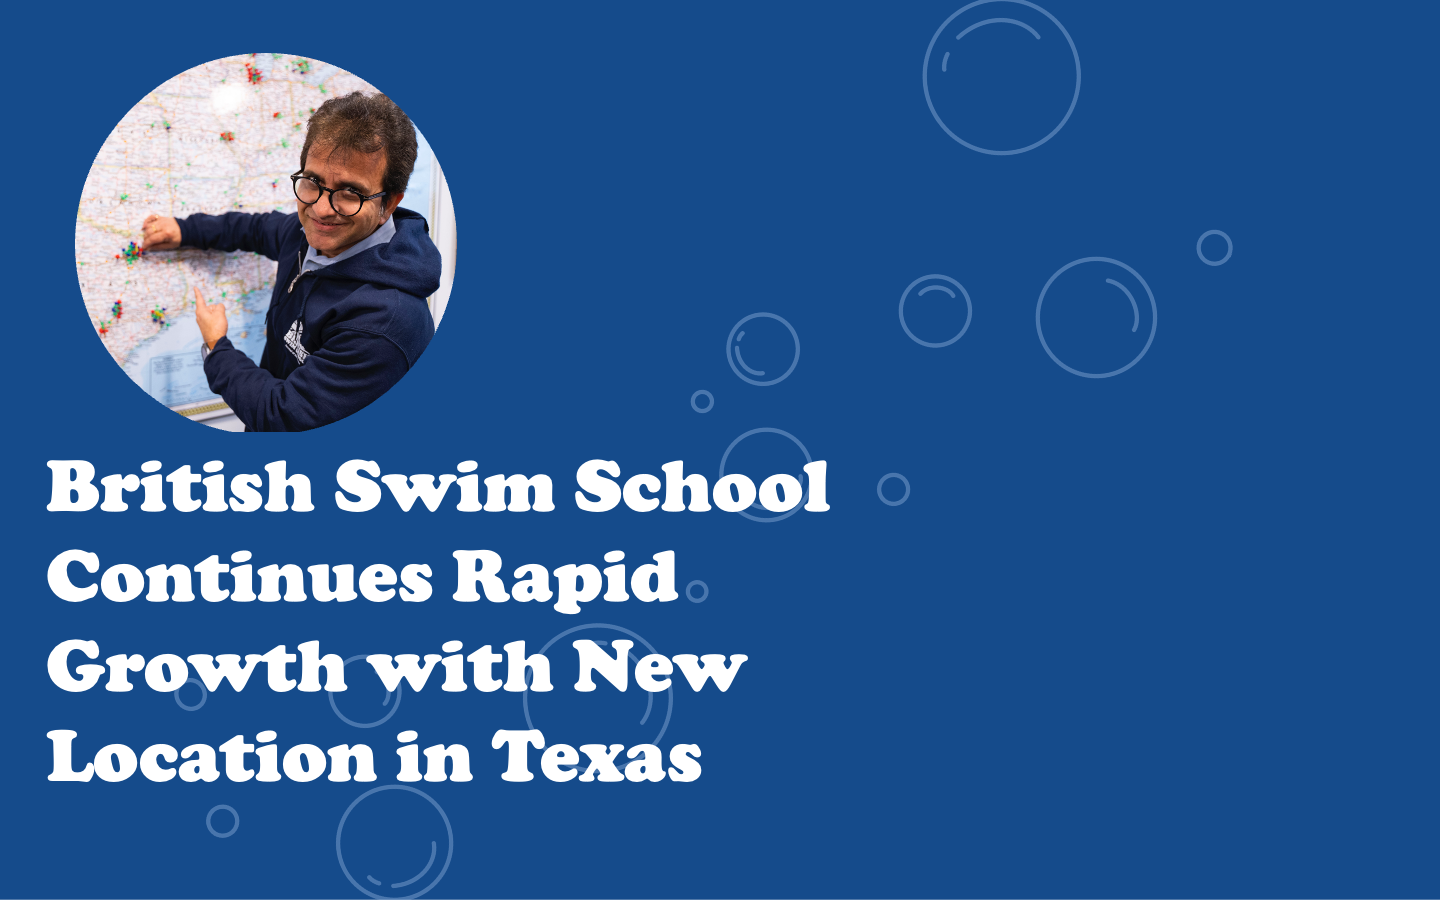 Image of British Swim School Continues Rapid Growth with New Location in Texas